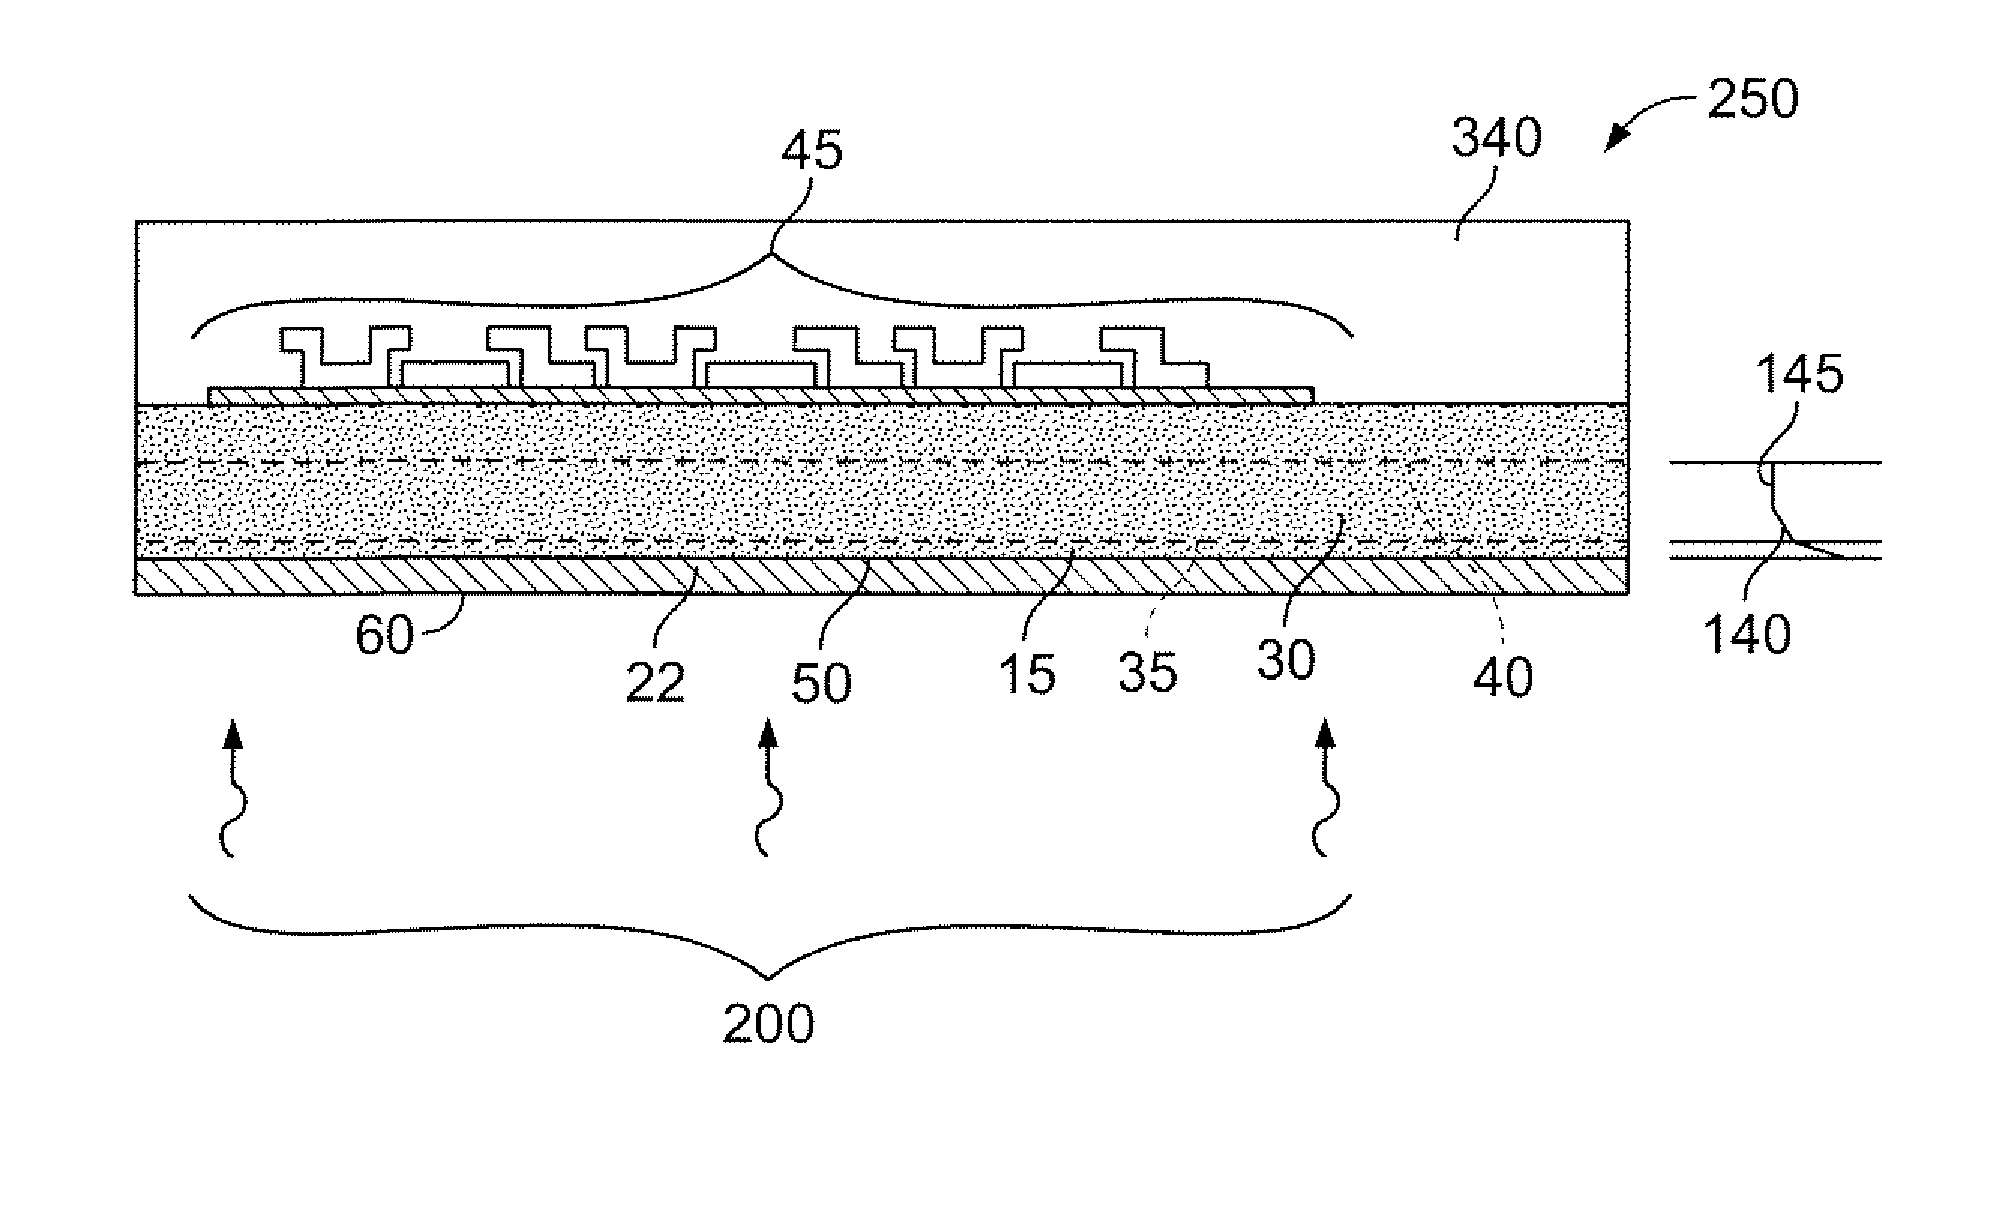 Dark Current Reduction in Back-Illuminated Imaging Sensors and Method of Fabricating Same